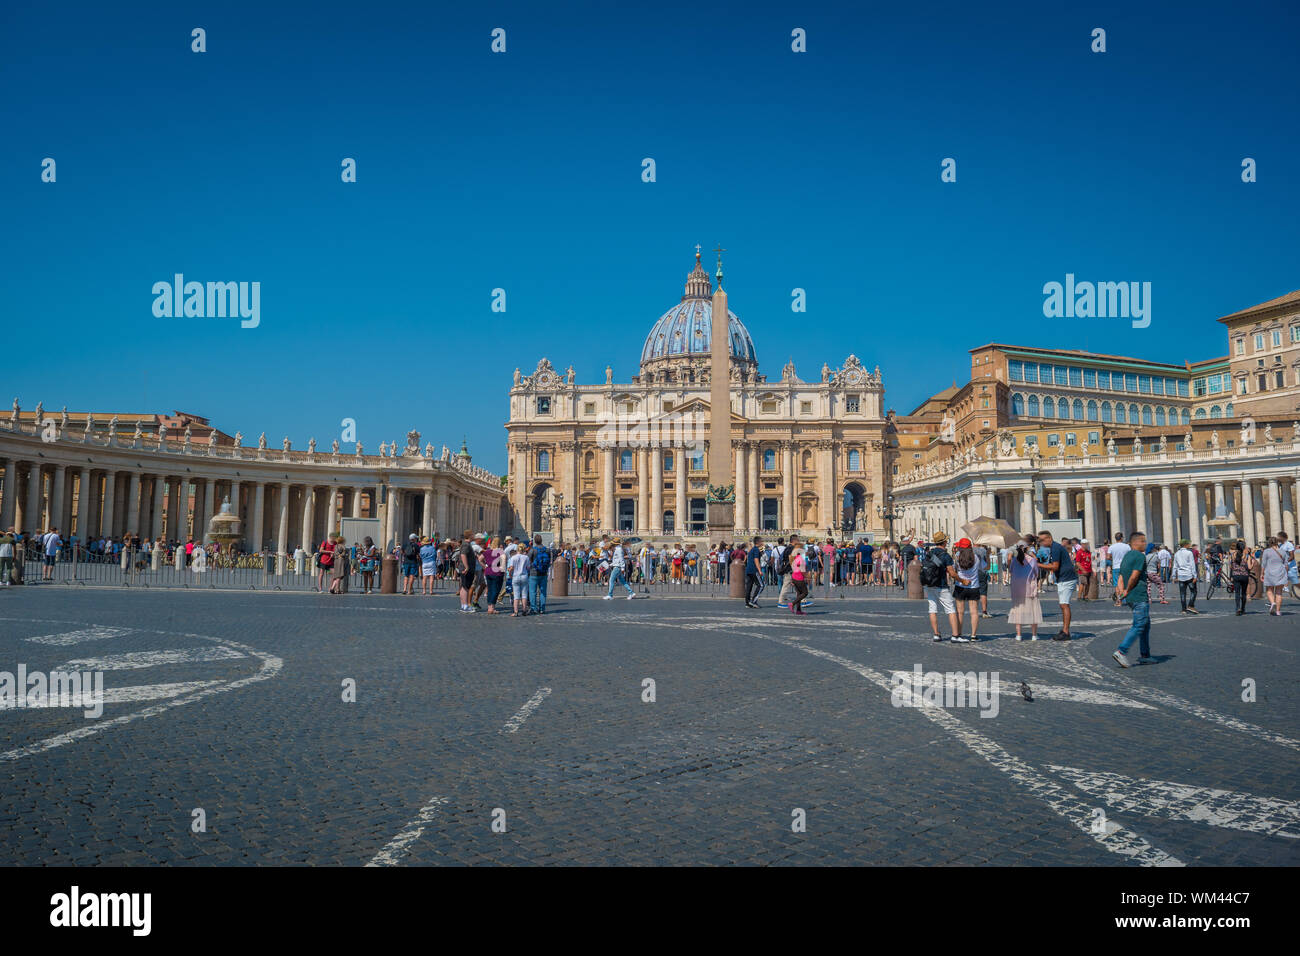 Pope Pius XII's Square and St. Peter's Square in Vatican City Stock Photo